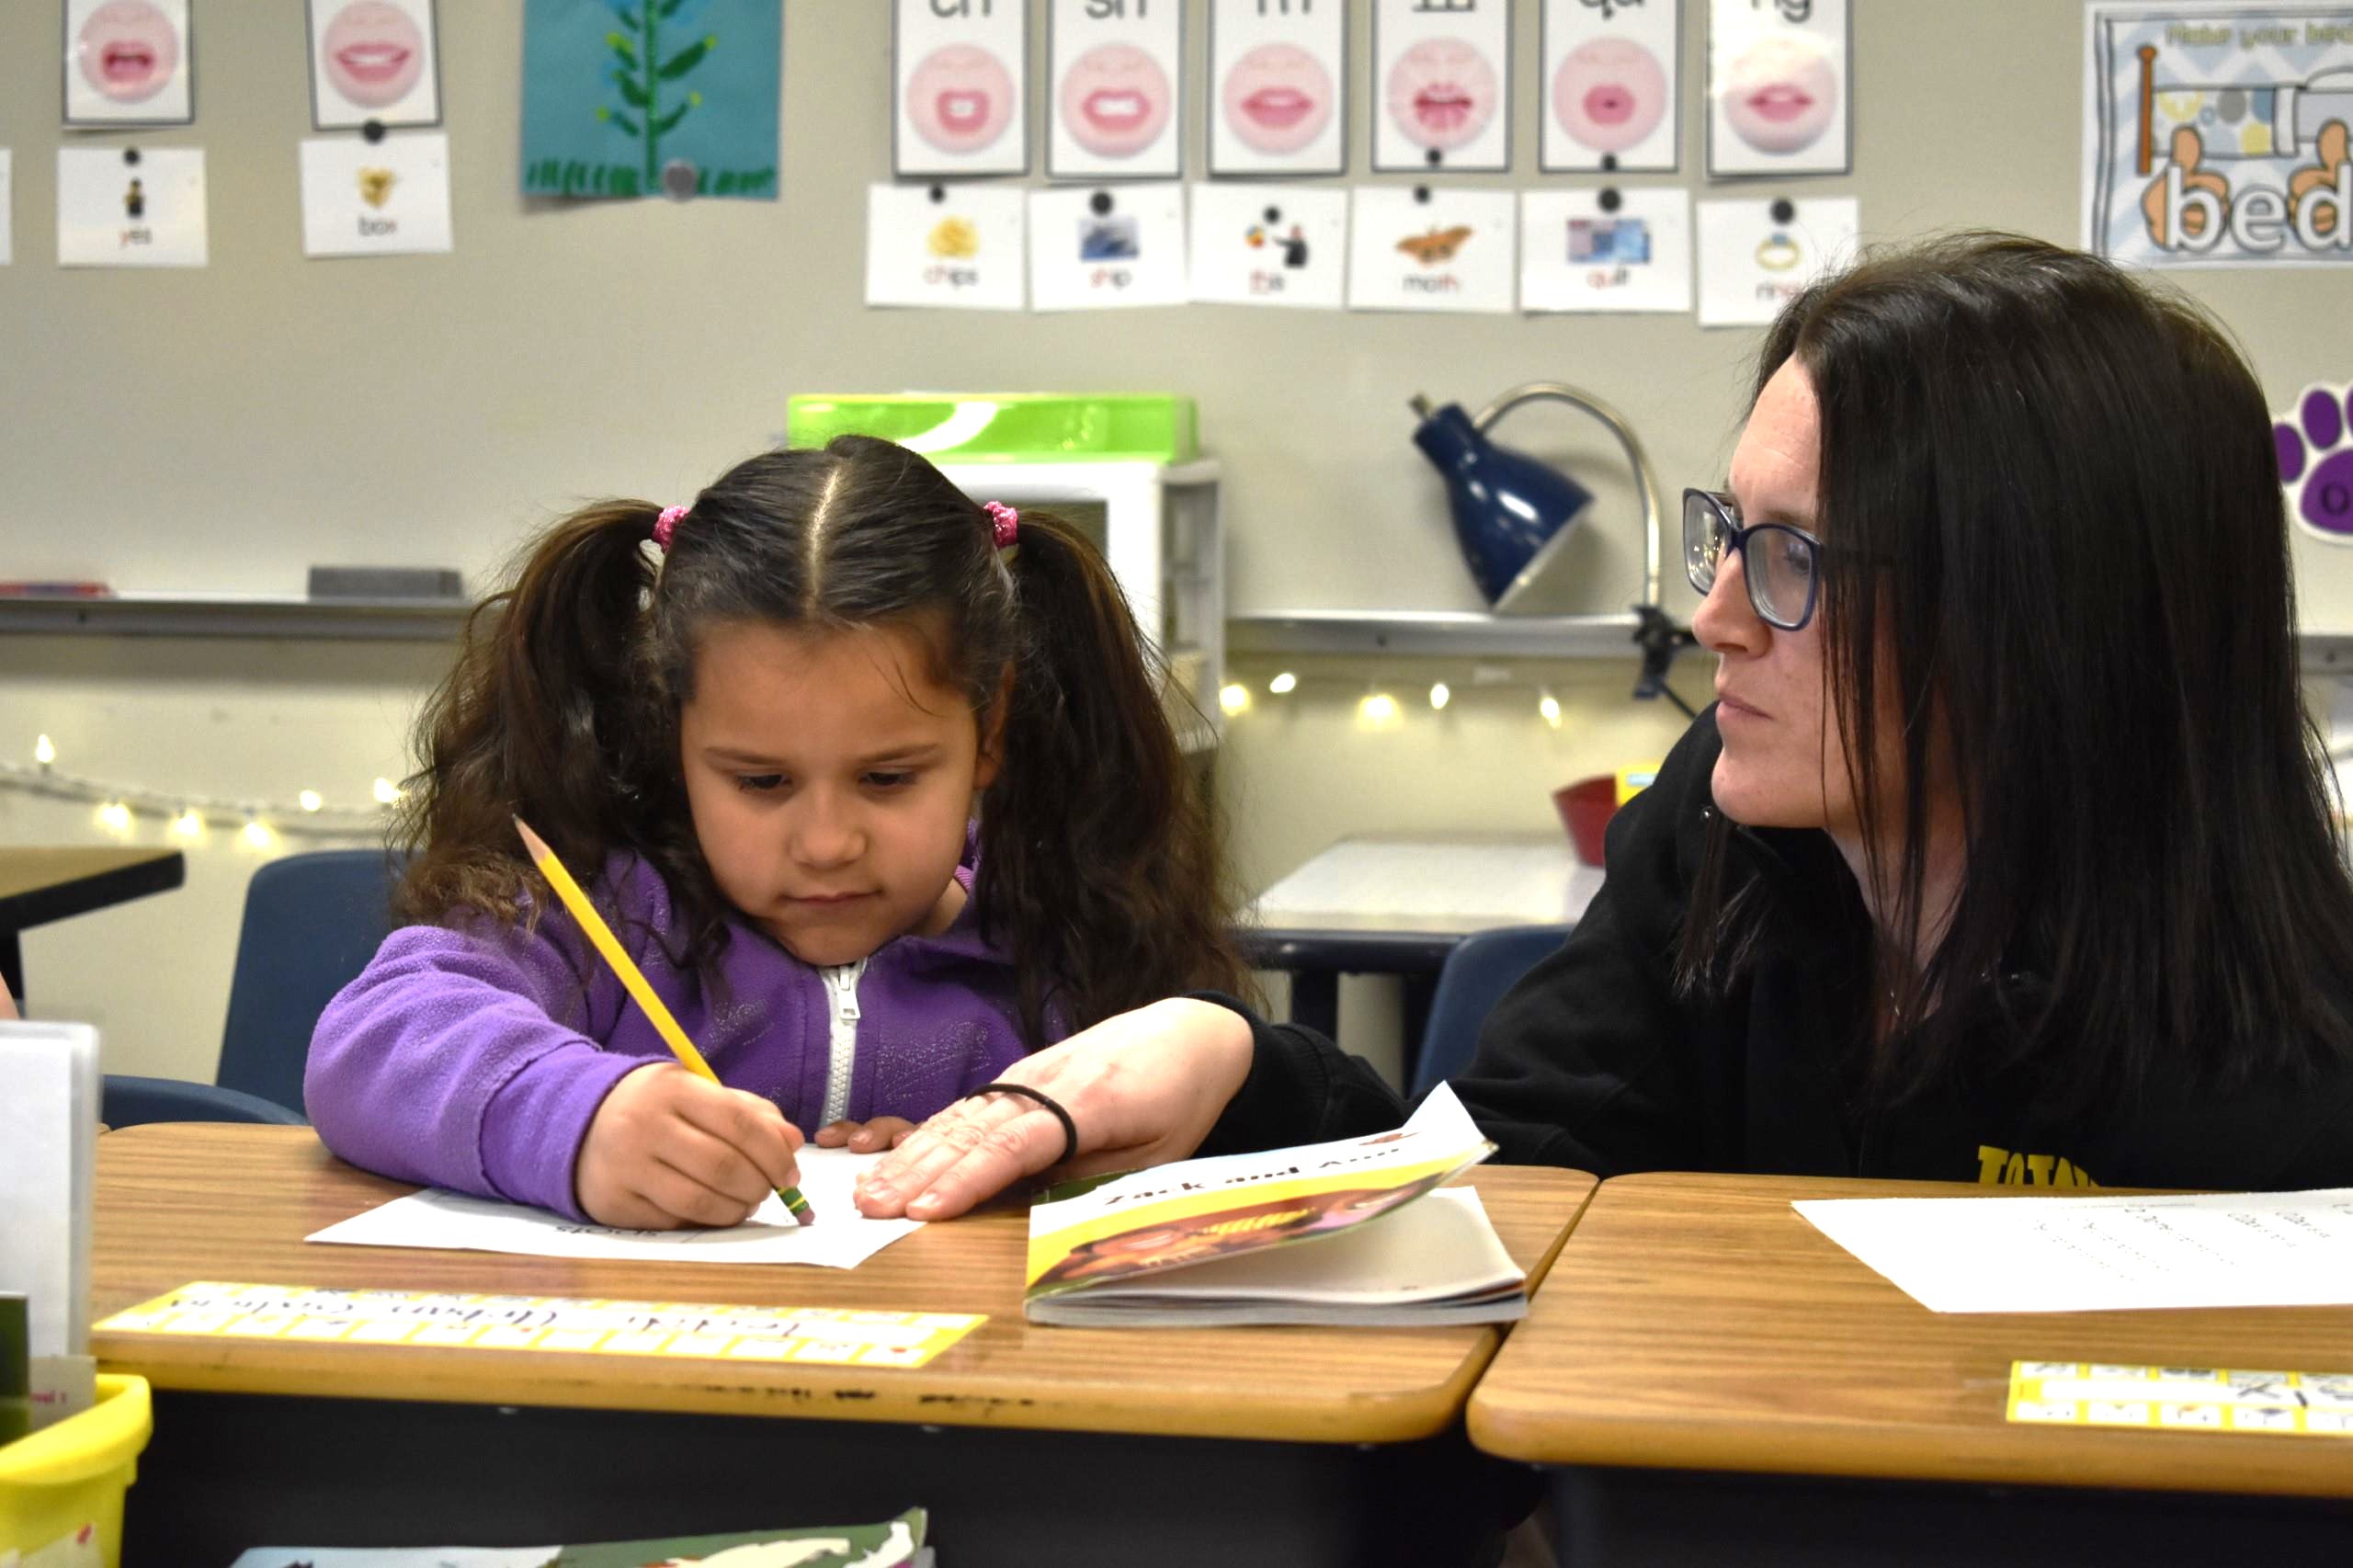 IRRC educator helps a student with a writing exercise during class